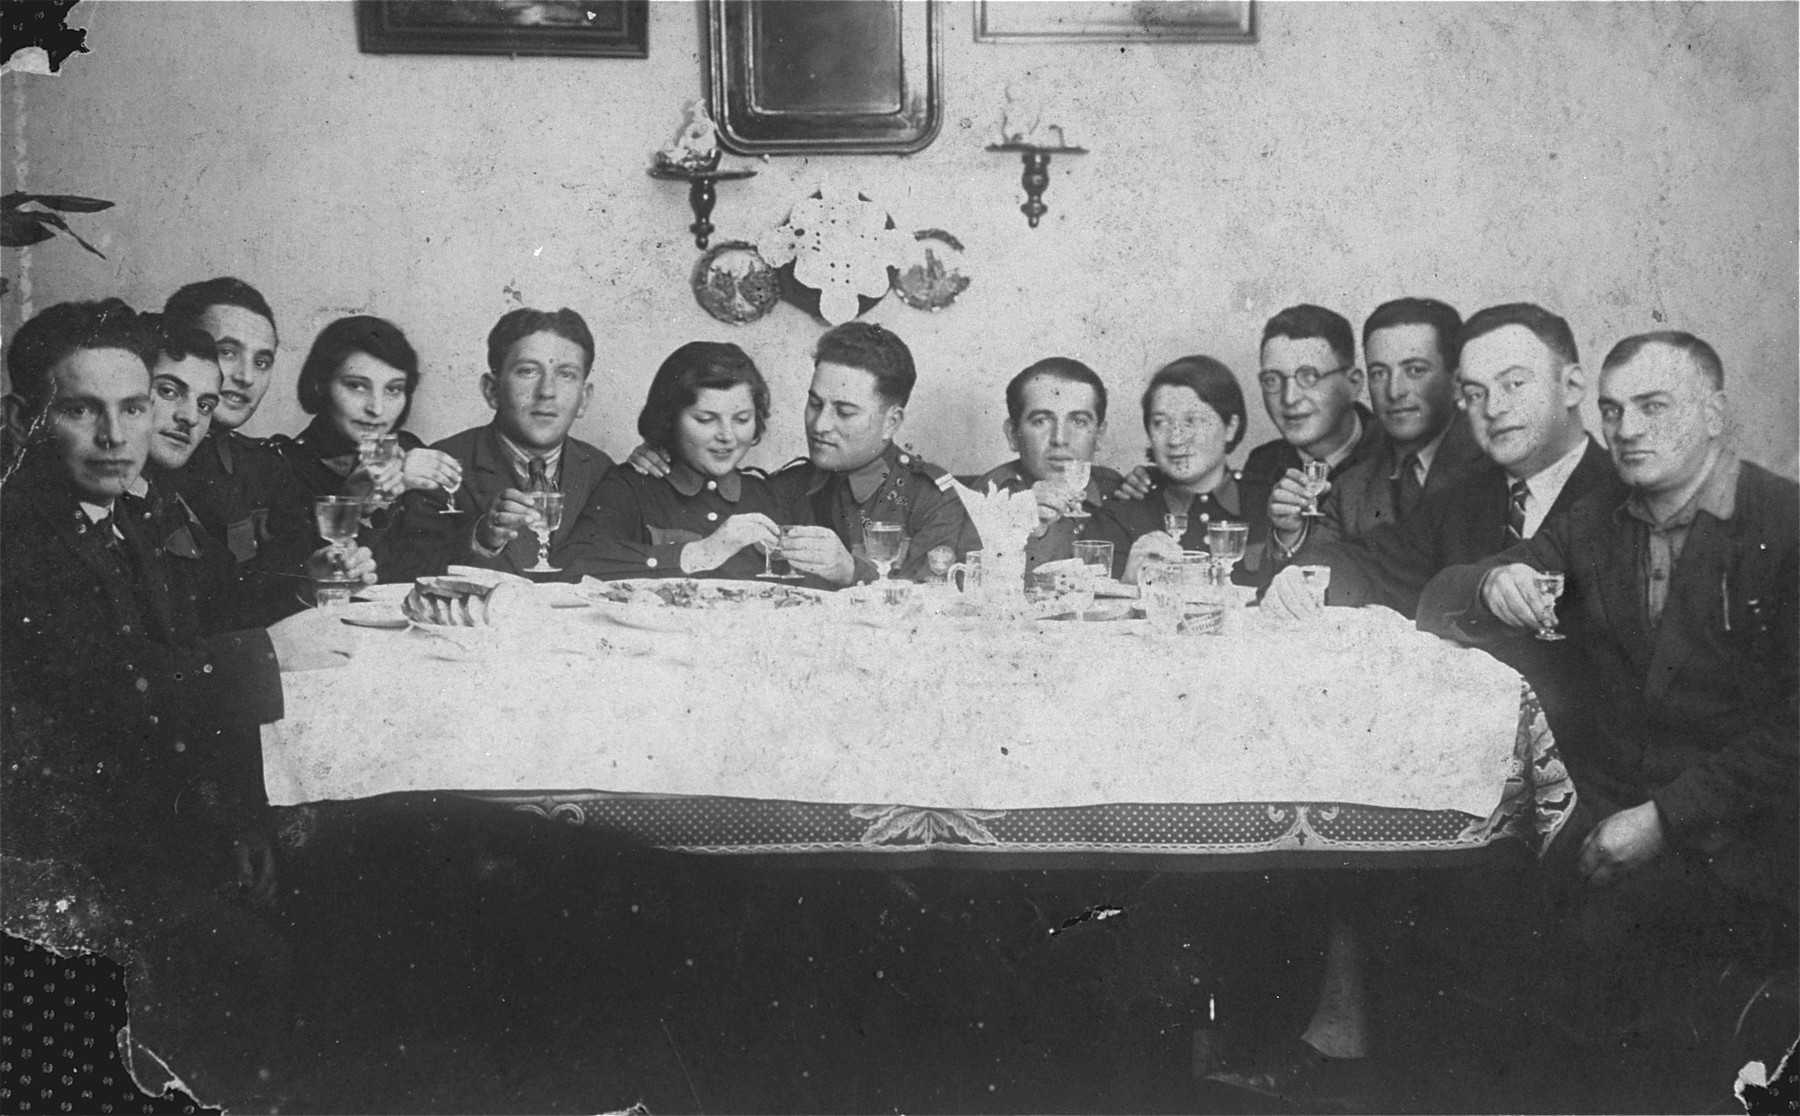 Members of Betar presidium in Sejny gather around at a  reception. 

Pictured left to right are Meyerowitz (the watchmaker and goldsmith of Sejny), Mones Shternberg, Furmanski, Tzipi Shvartz (daughter of the cantor), unidentified, Libe Lavertovitz (married a doctor from Paris and survived the war there), Yakov Ostrov (representative of Betar movement), Yehuda Edlin, Leah Neuerman, Zaidka Shvartz (violinist), Volf Ostrow, Moshe Miszkinski, and Peretz.